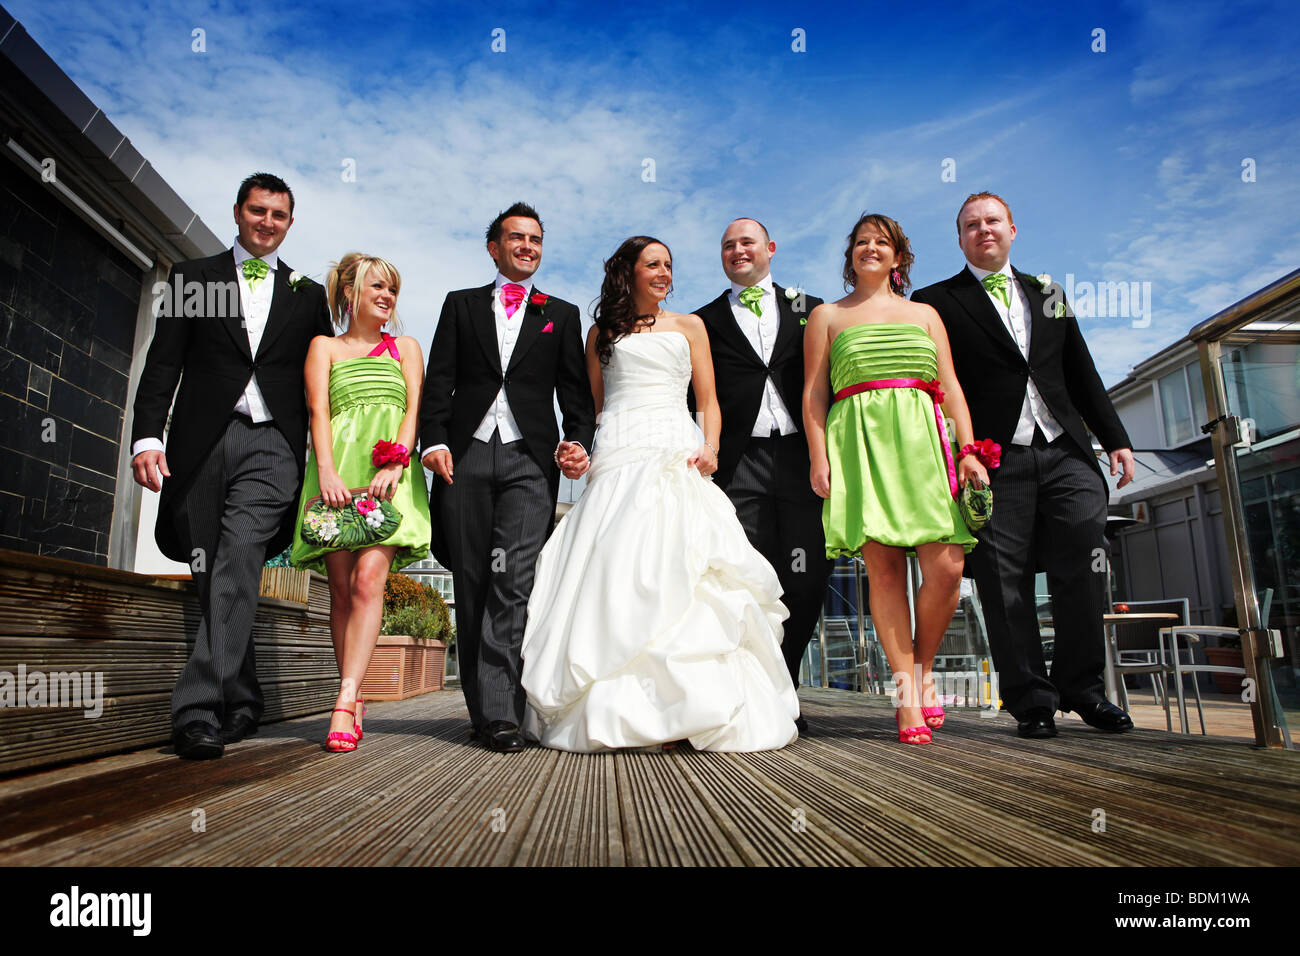 Bride and Groom and bridal party brides maids ushers best man walking hand in hand at a colourful summer wedding unusual angle Stock Photo